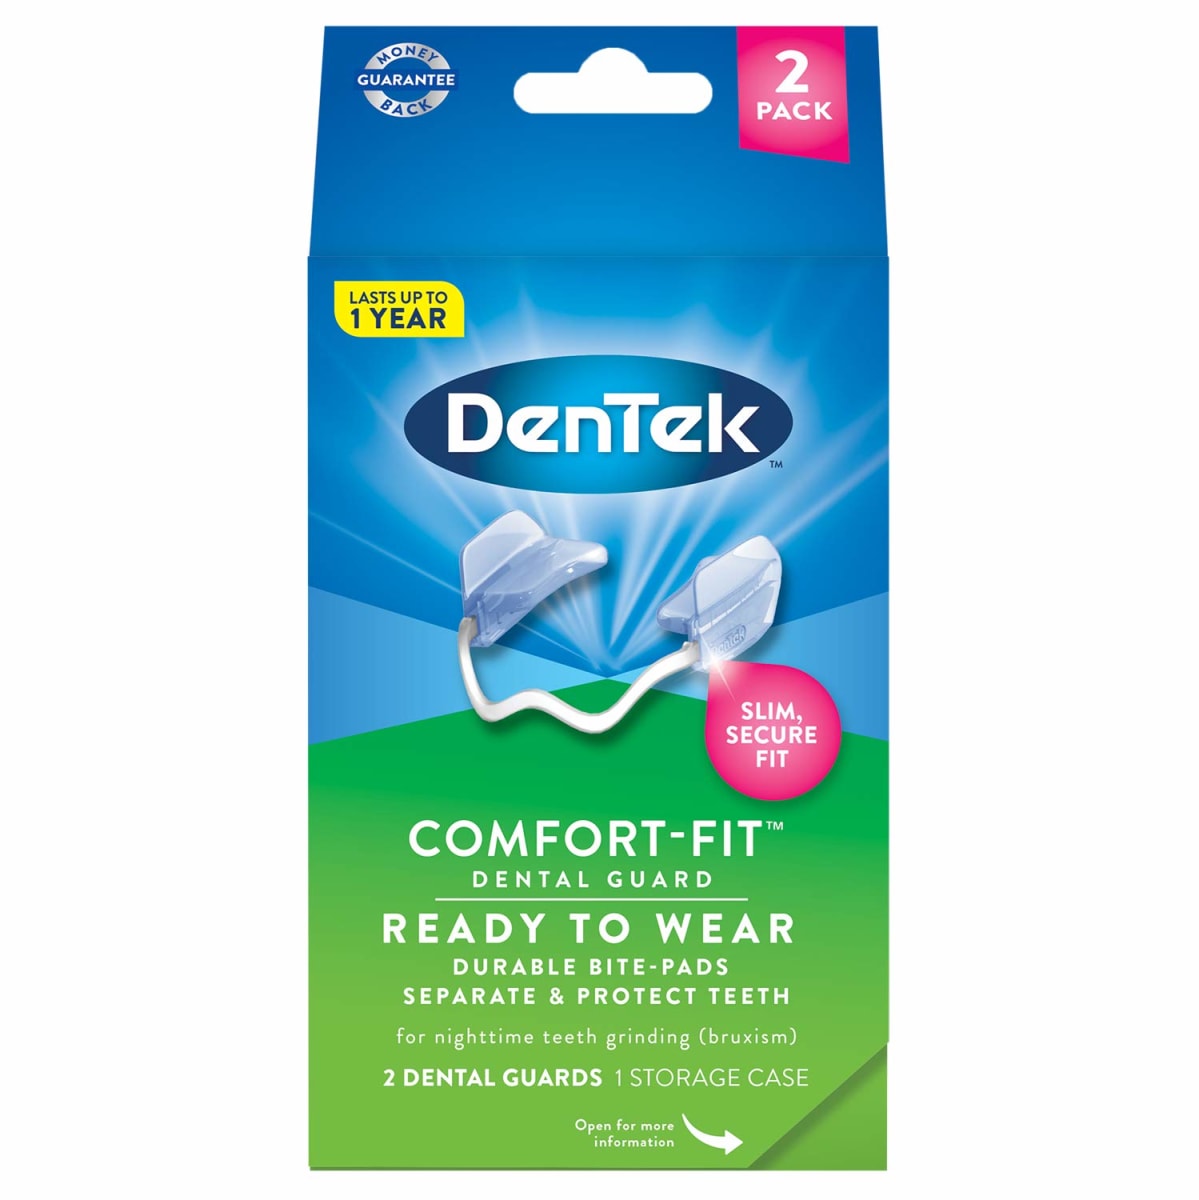 Comfort-Fit Dental Guard For Nighttime Teeth Grinding